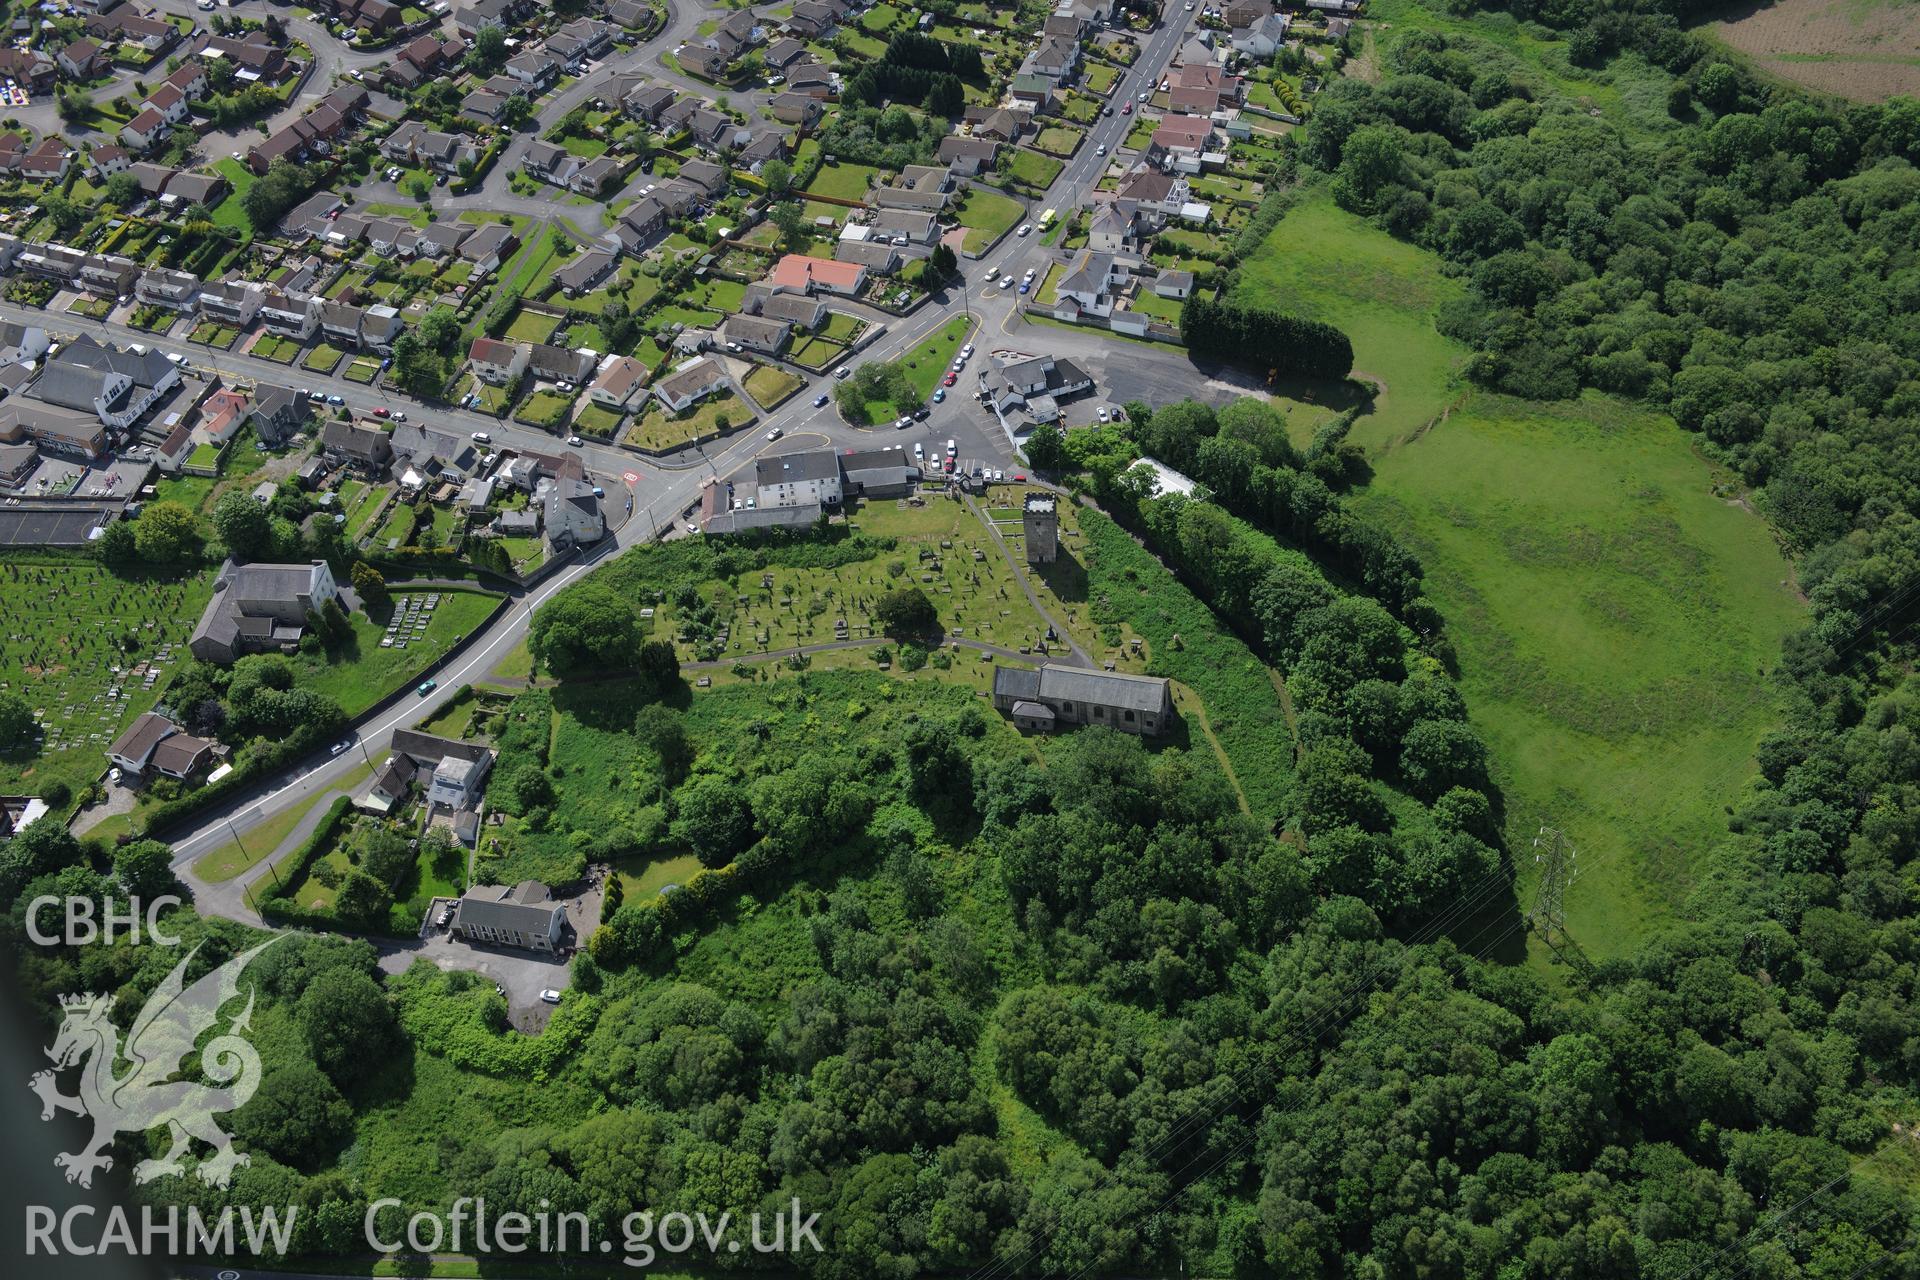 Bethel Methodist chapel, St. David and St. Cyfelach's church, and the church's tower (detached), Llangyfelach. Oblique aerial photograph taken during the Royal Commission's programme of archaeological aerial reconnaissance by Toby Driver on 19th June 2015.